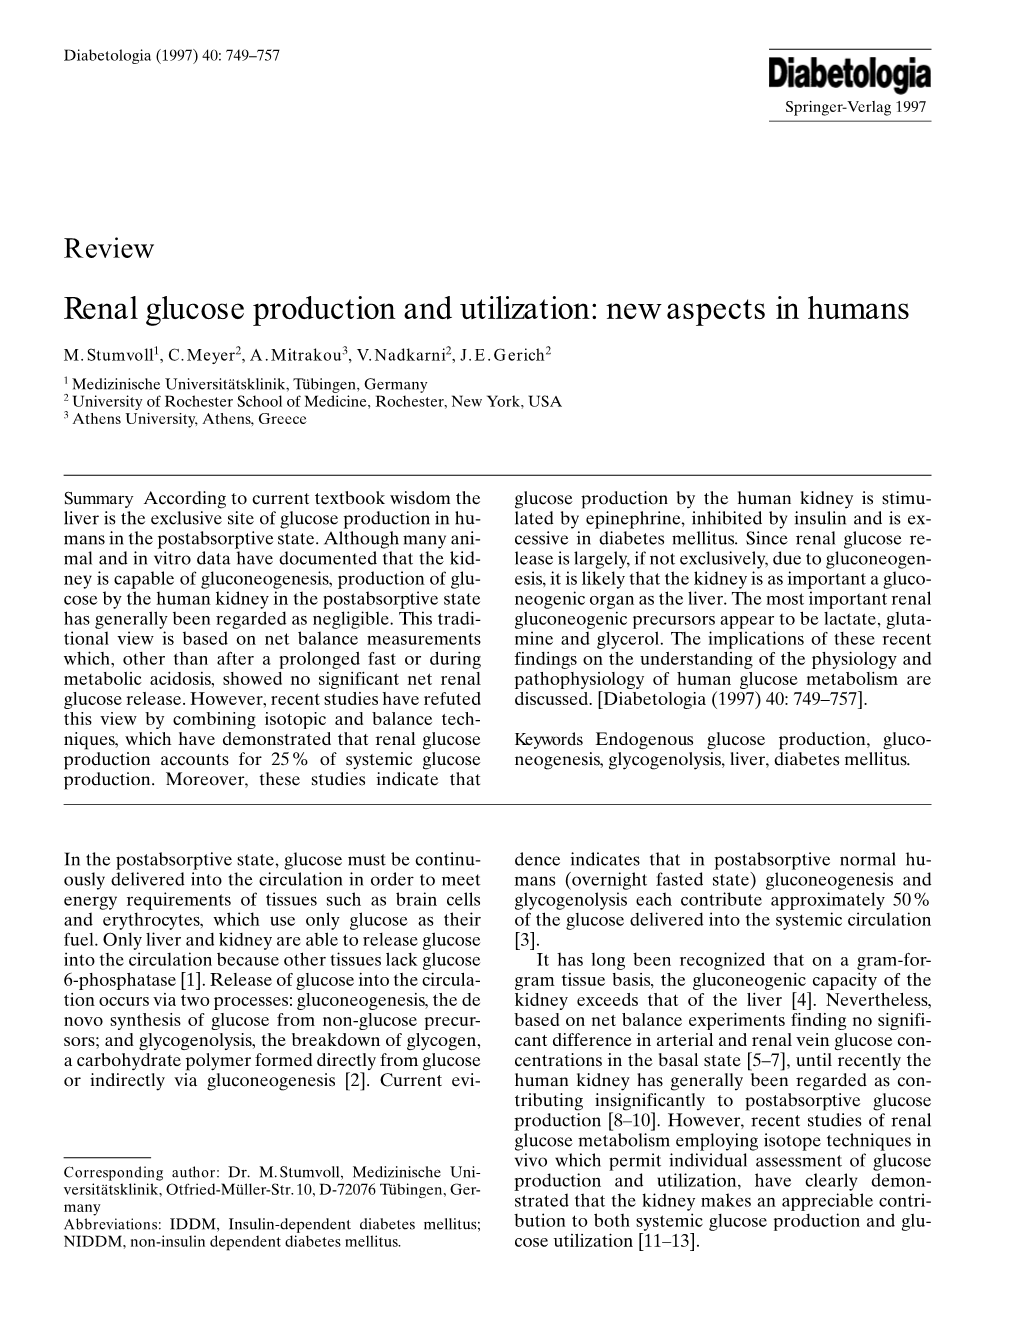 Renal Glucose Production and Utilization: New Aspects in Humans